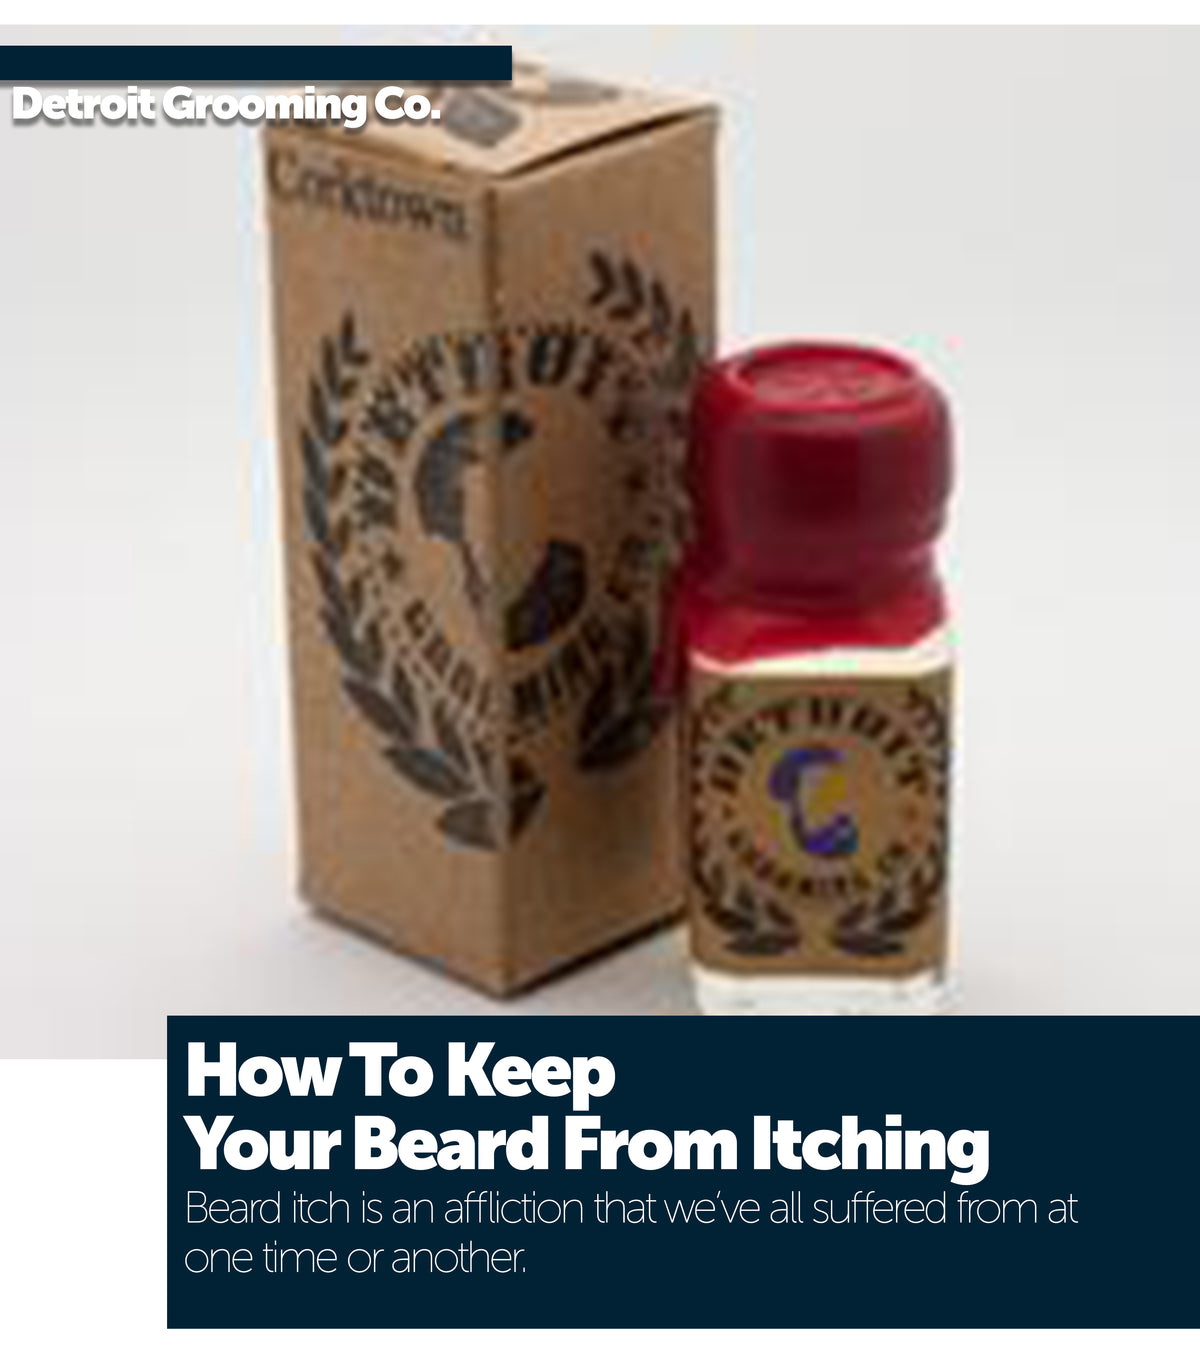 How to Keep Your Beard from Itching